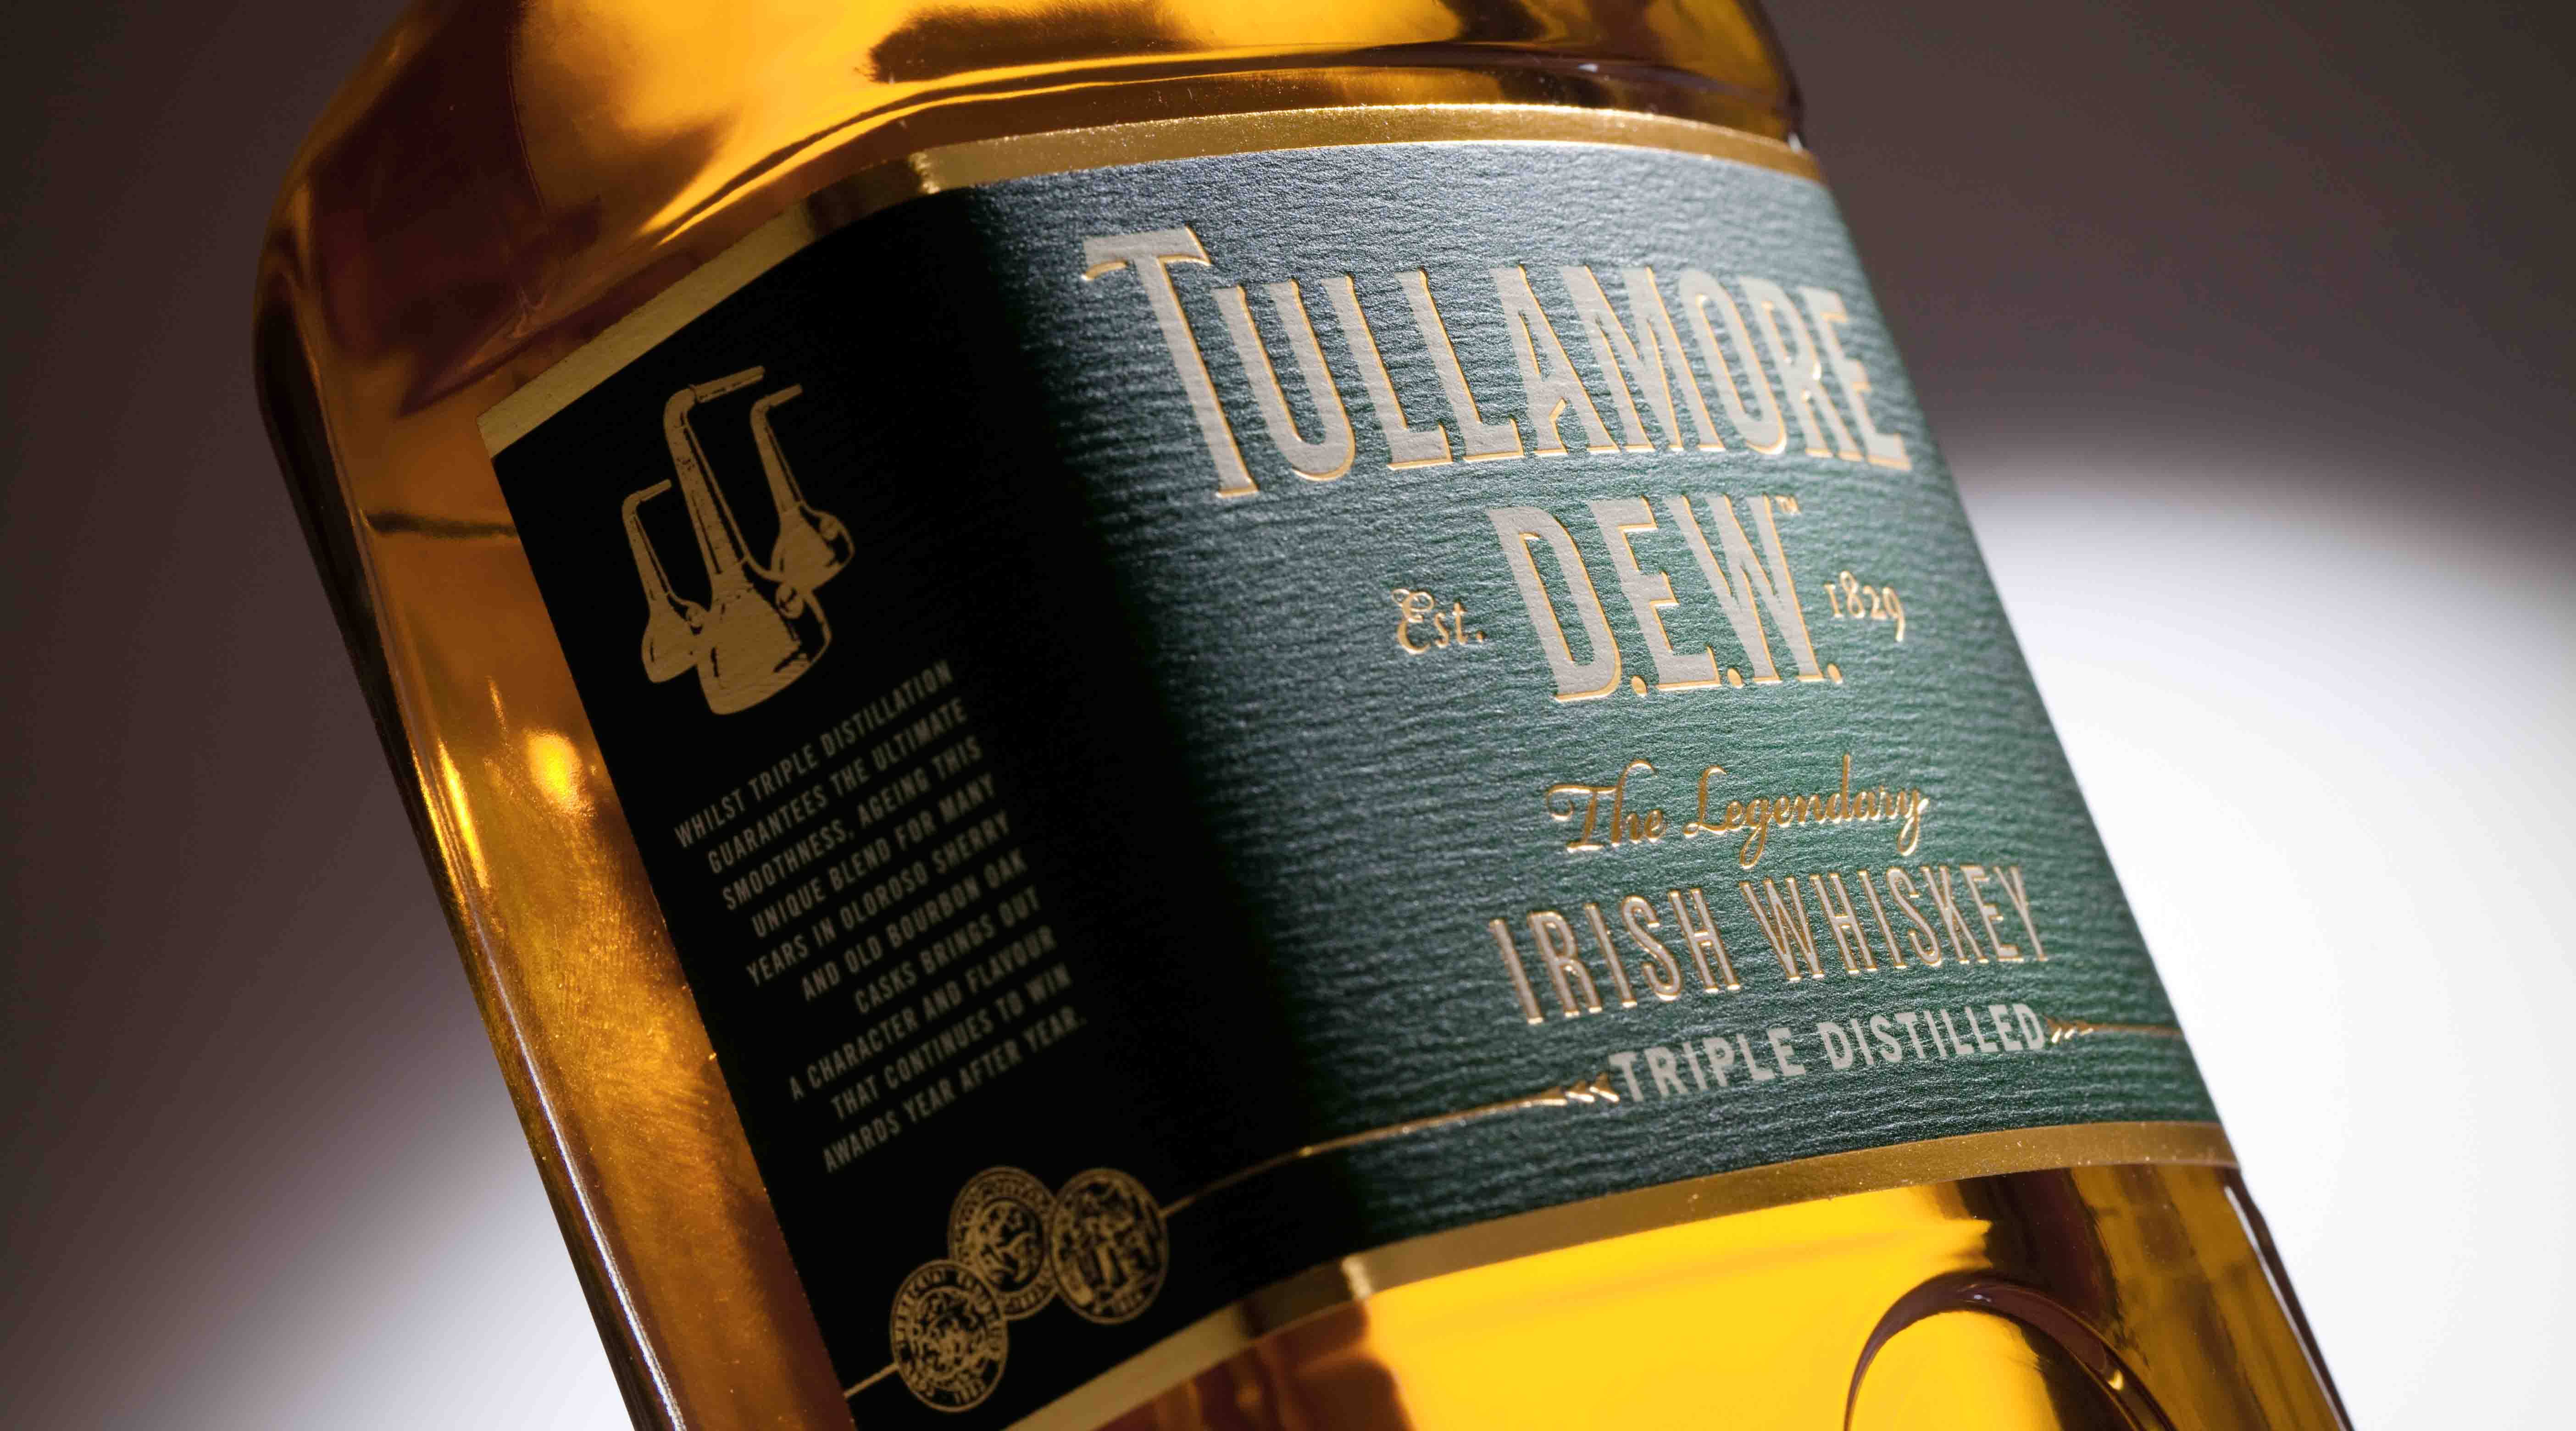 Richmond Marketing has been appointed official distributor here of Tullamore Dew.